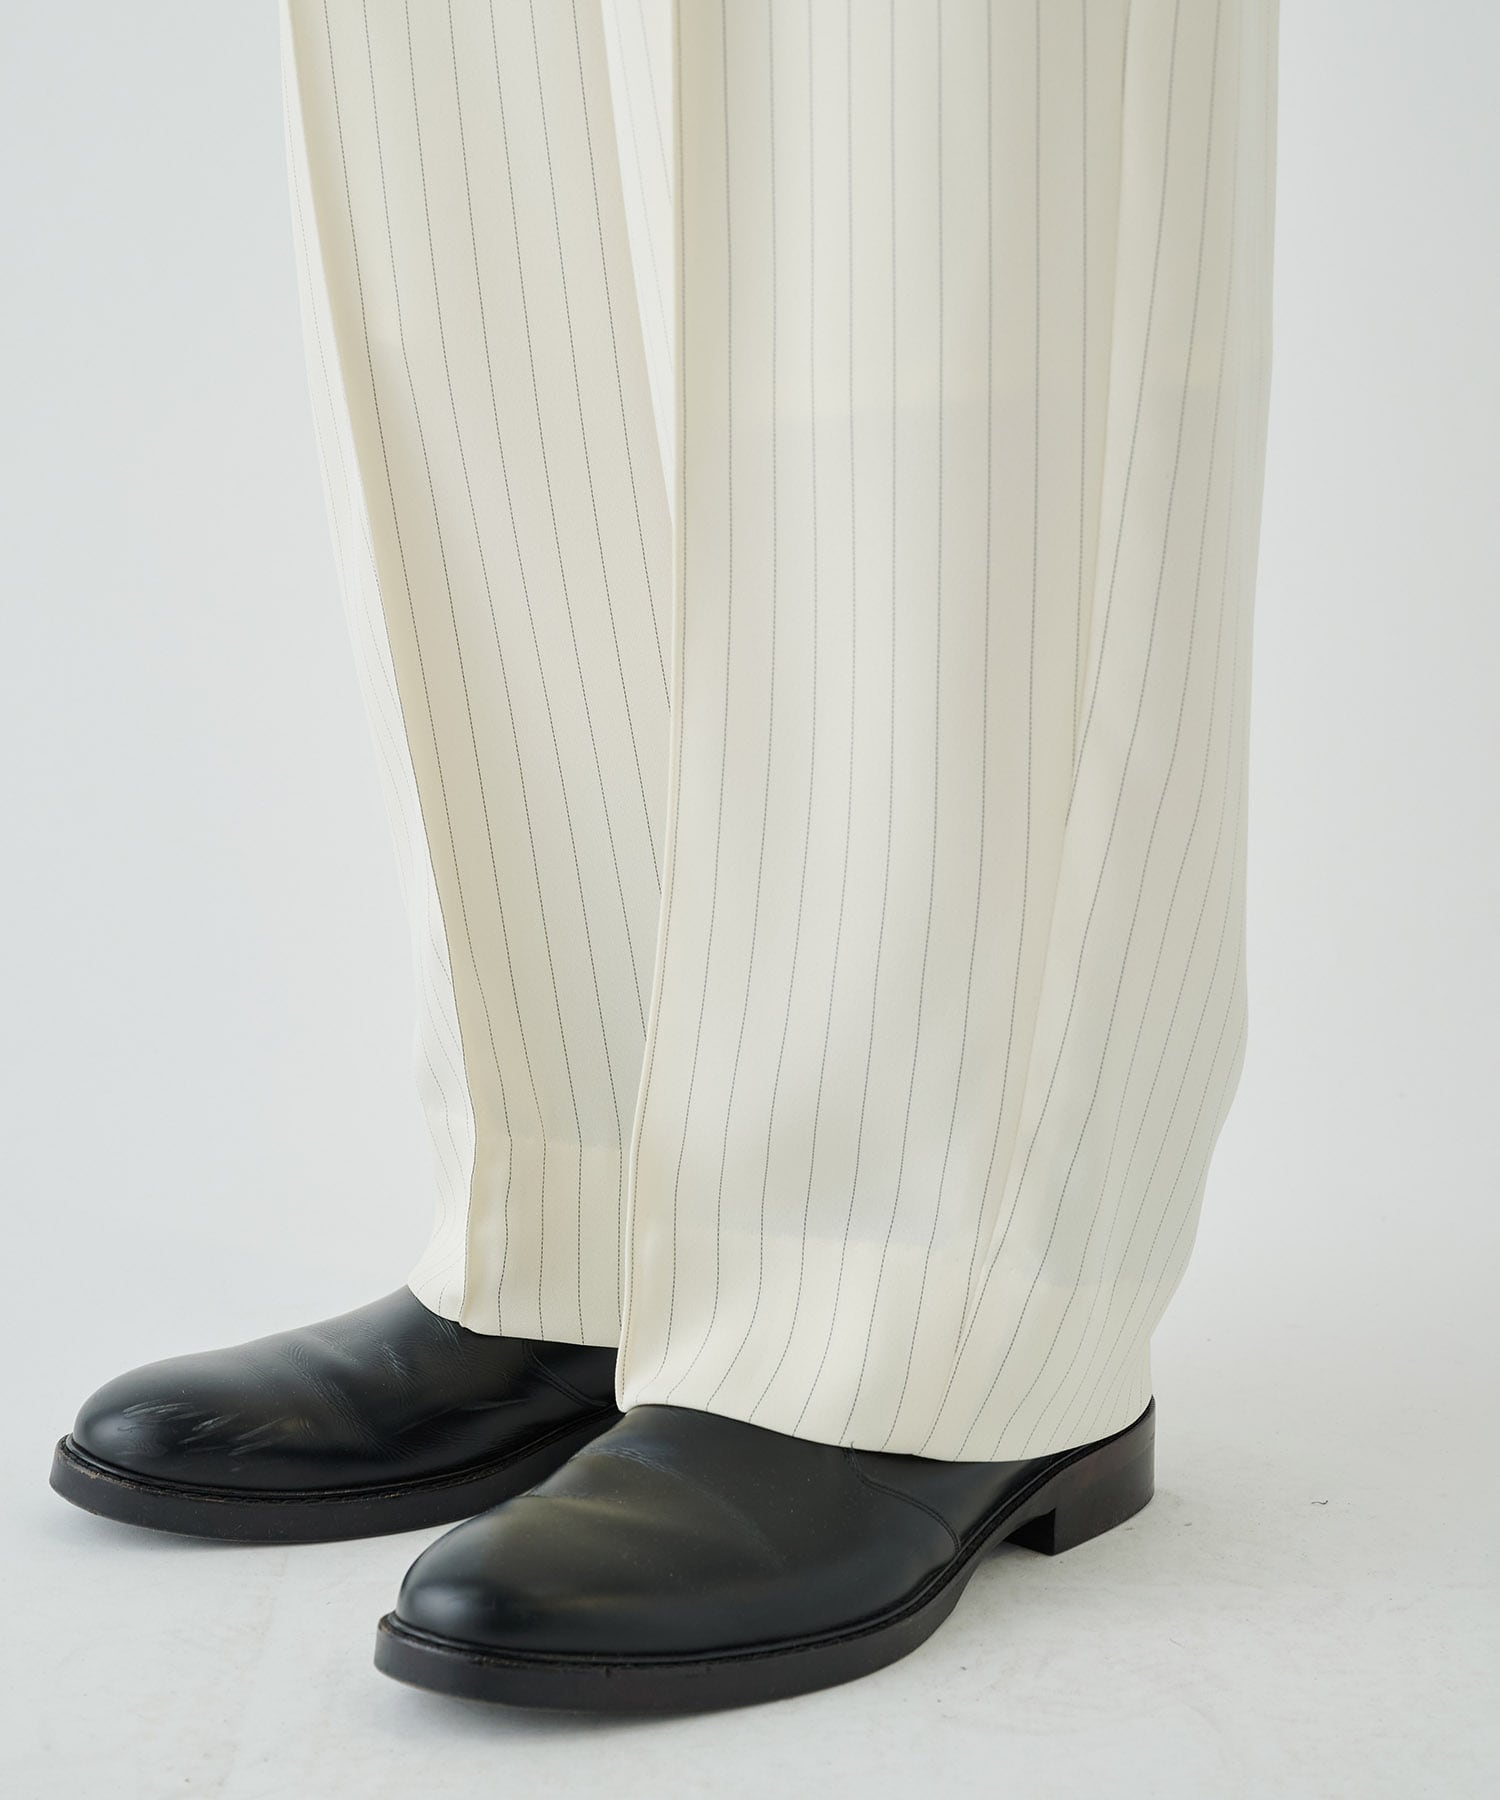 Stripe Double Cloth 2 Tuck Wide Pants with Long Belt CULLNI